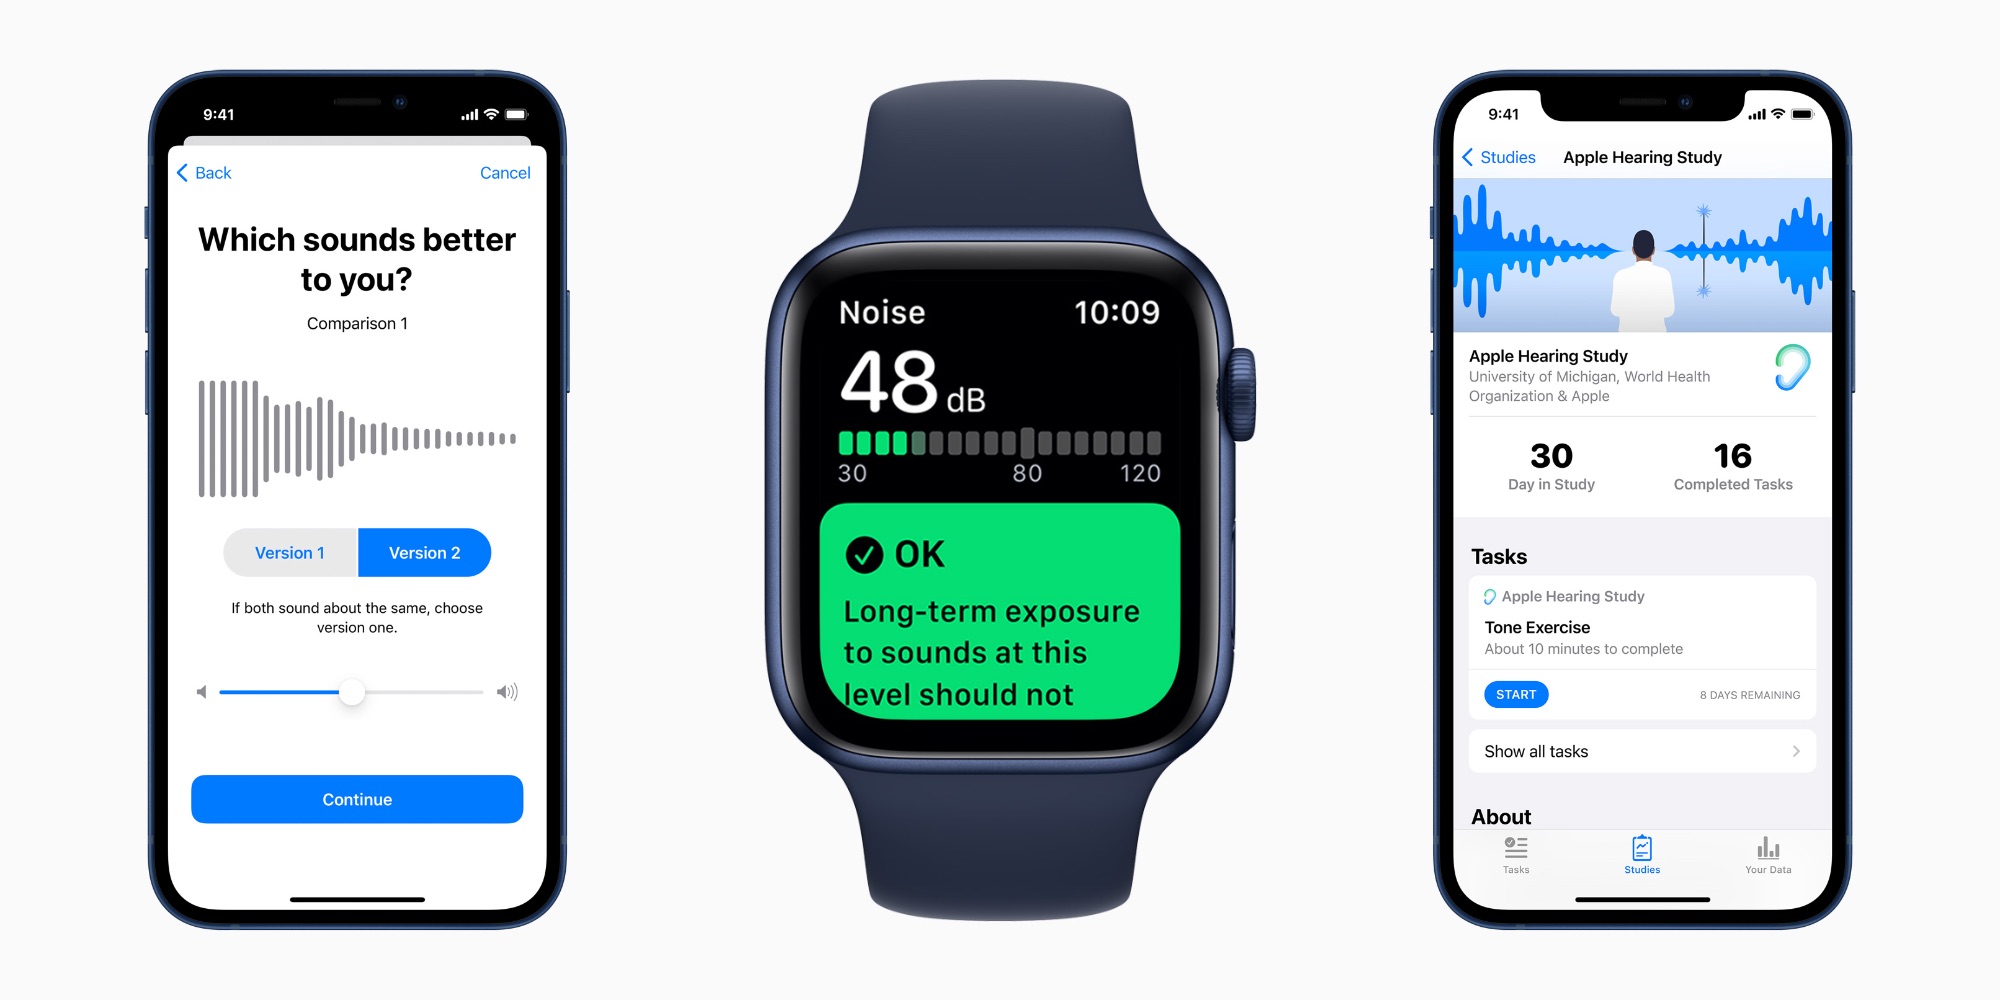 Apple shares first insights from hearing study based on iPhone and Apple Watch data